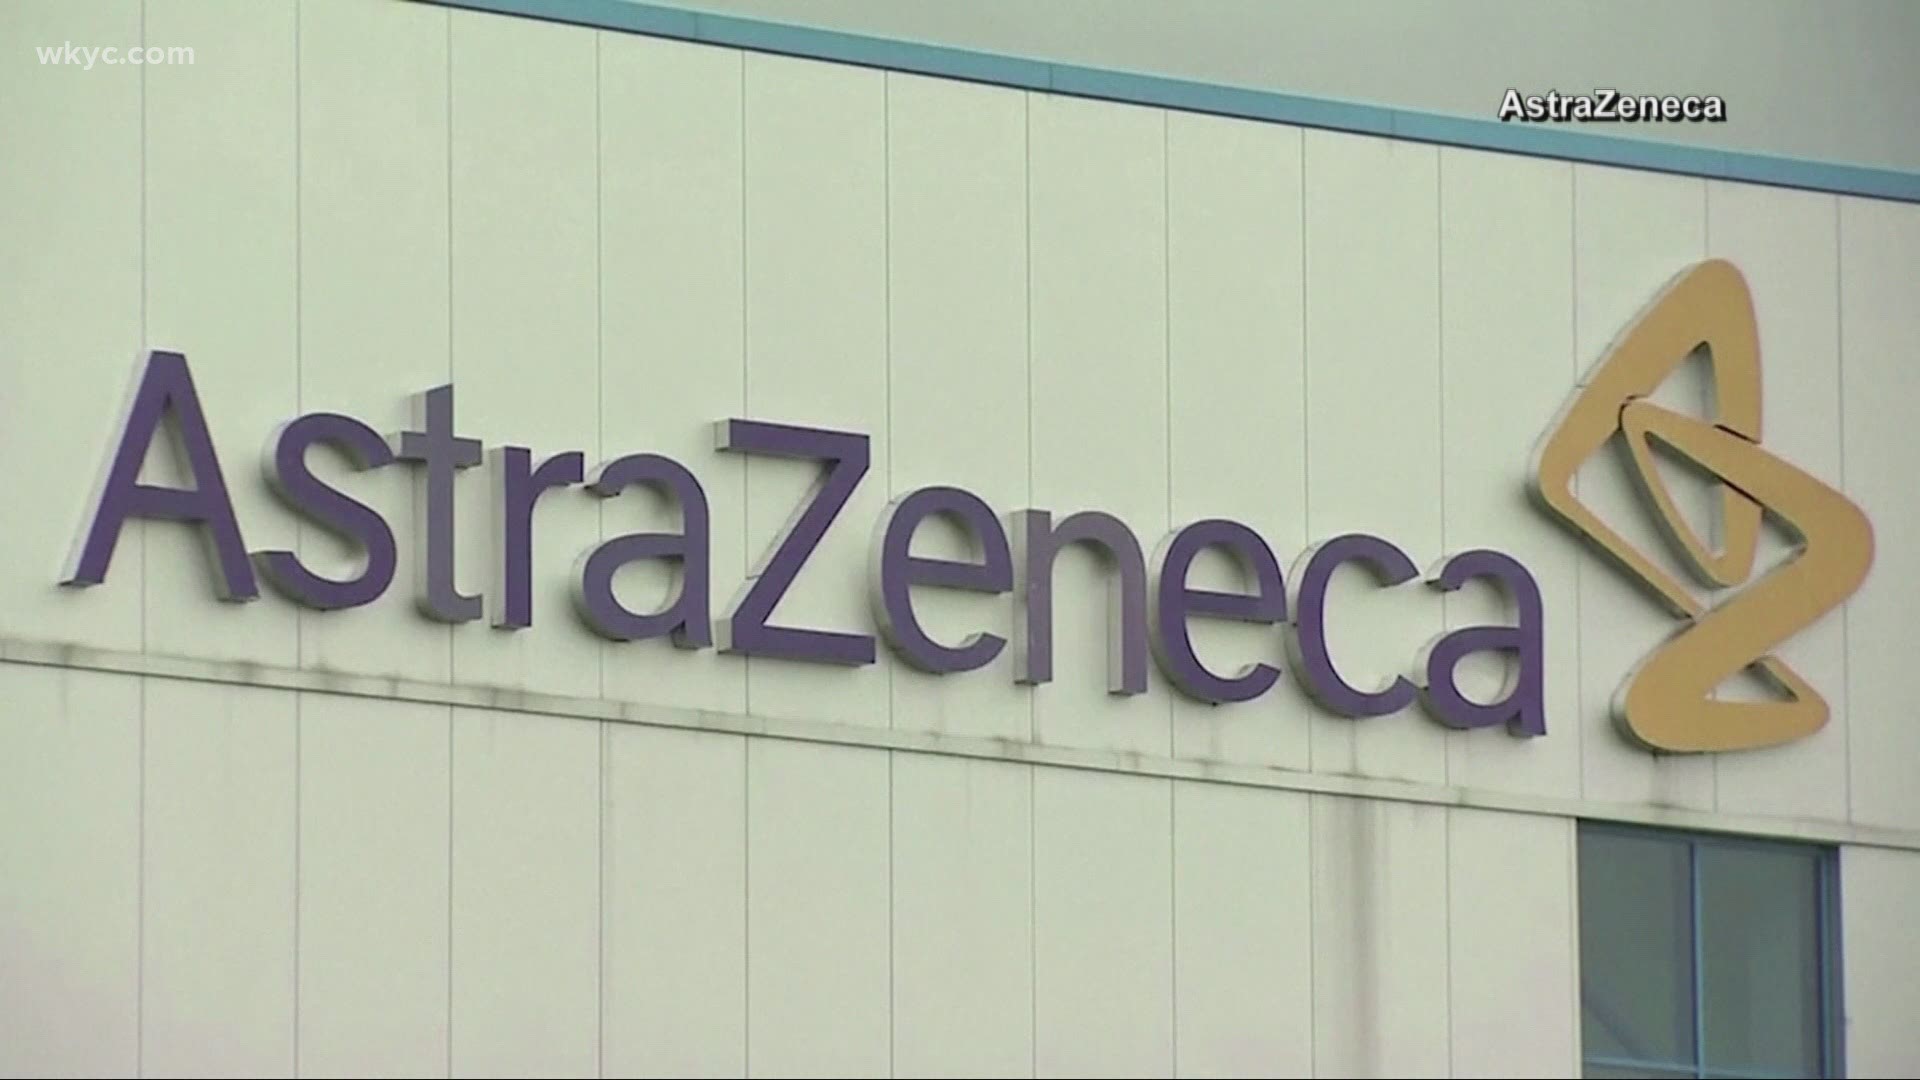 American federal health officials say the US trial of Astrazeneca's covid vaccine may have included "outdated information."